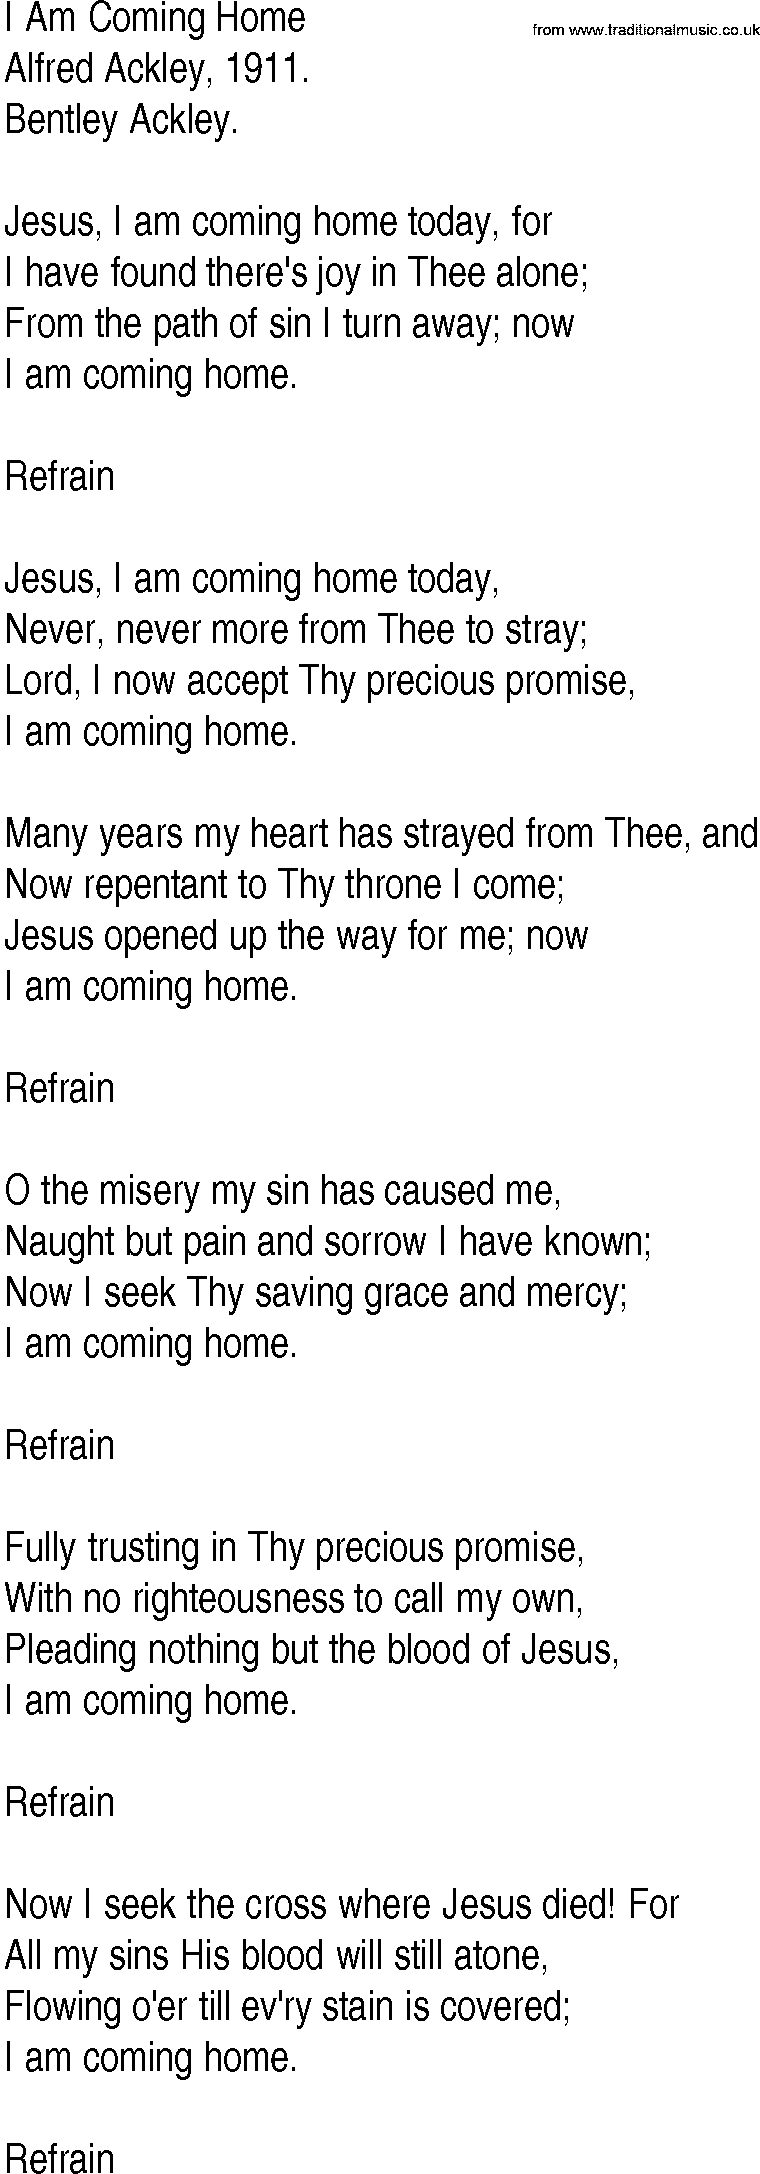 Hymn and Gospel Song: I Am Coming Home by Alfred Ackley lyrics